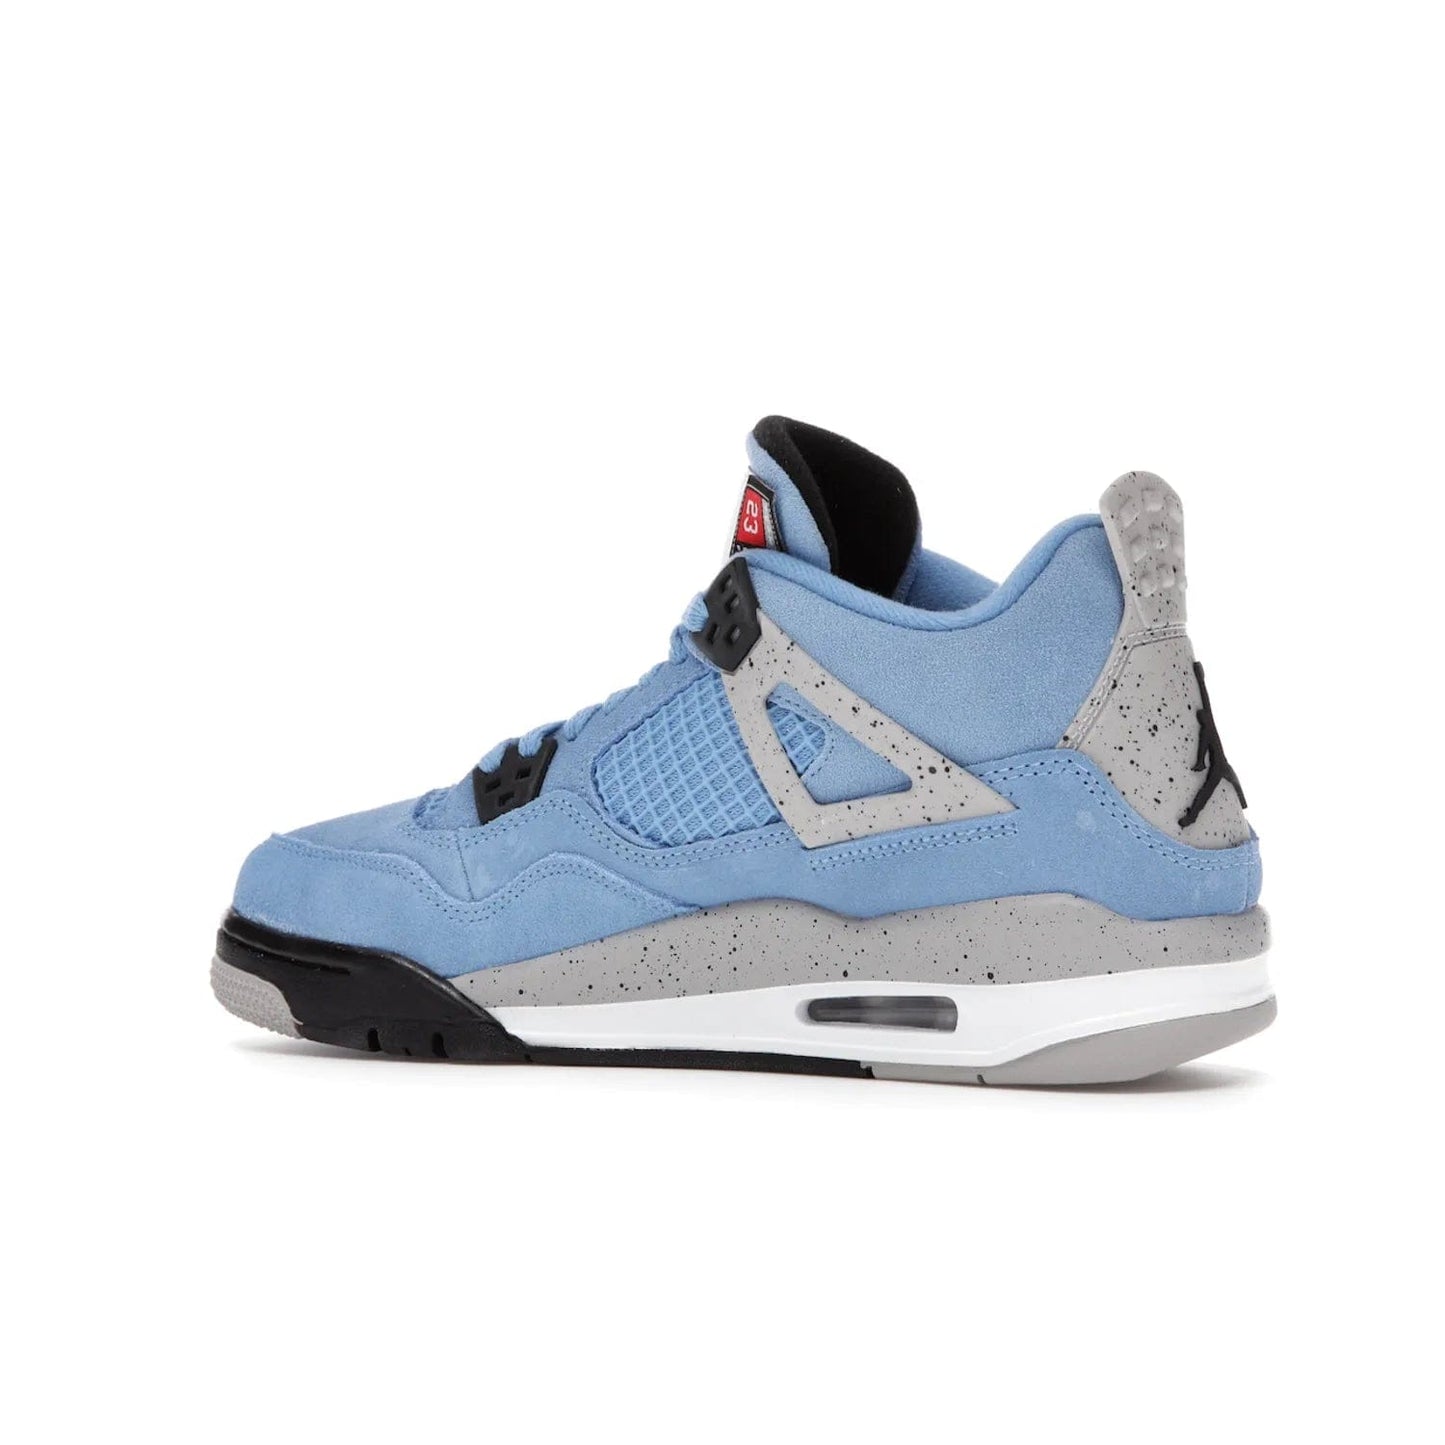 Jordan 4 Retro University Blue (GS) - Image 22 - Only at www.BallersClubKickz.com - Air Jordan 4 Retro University Blue GS: Classic silhouette and vibrant colors. Featuring a suede upper and Jumpman icon, this grade school-size shoe is perfect for collections and retails at $150.